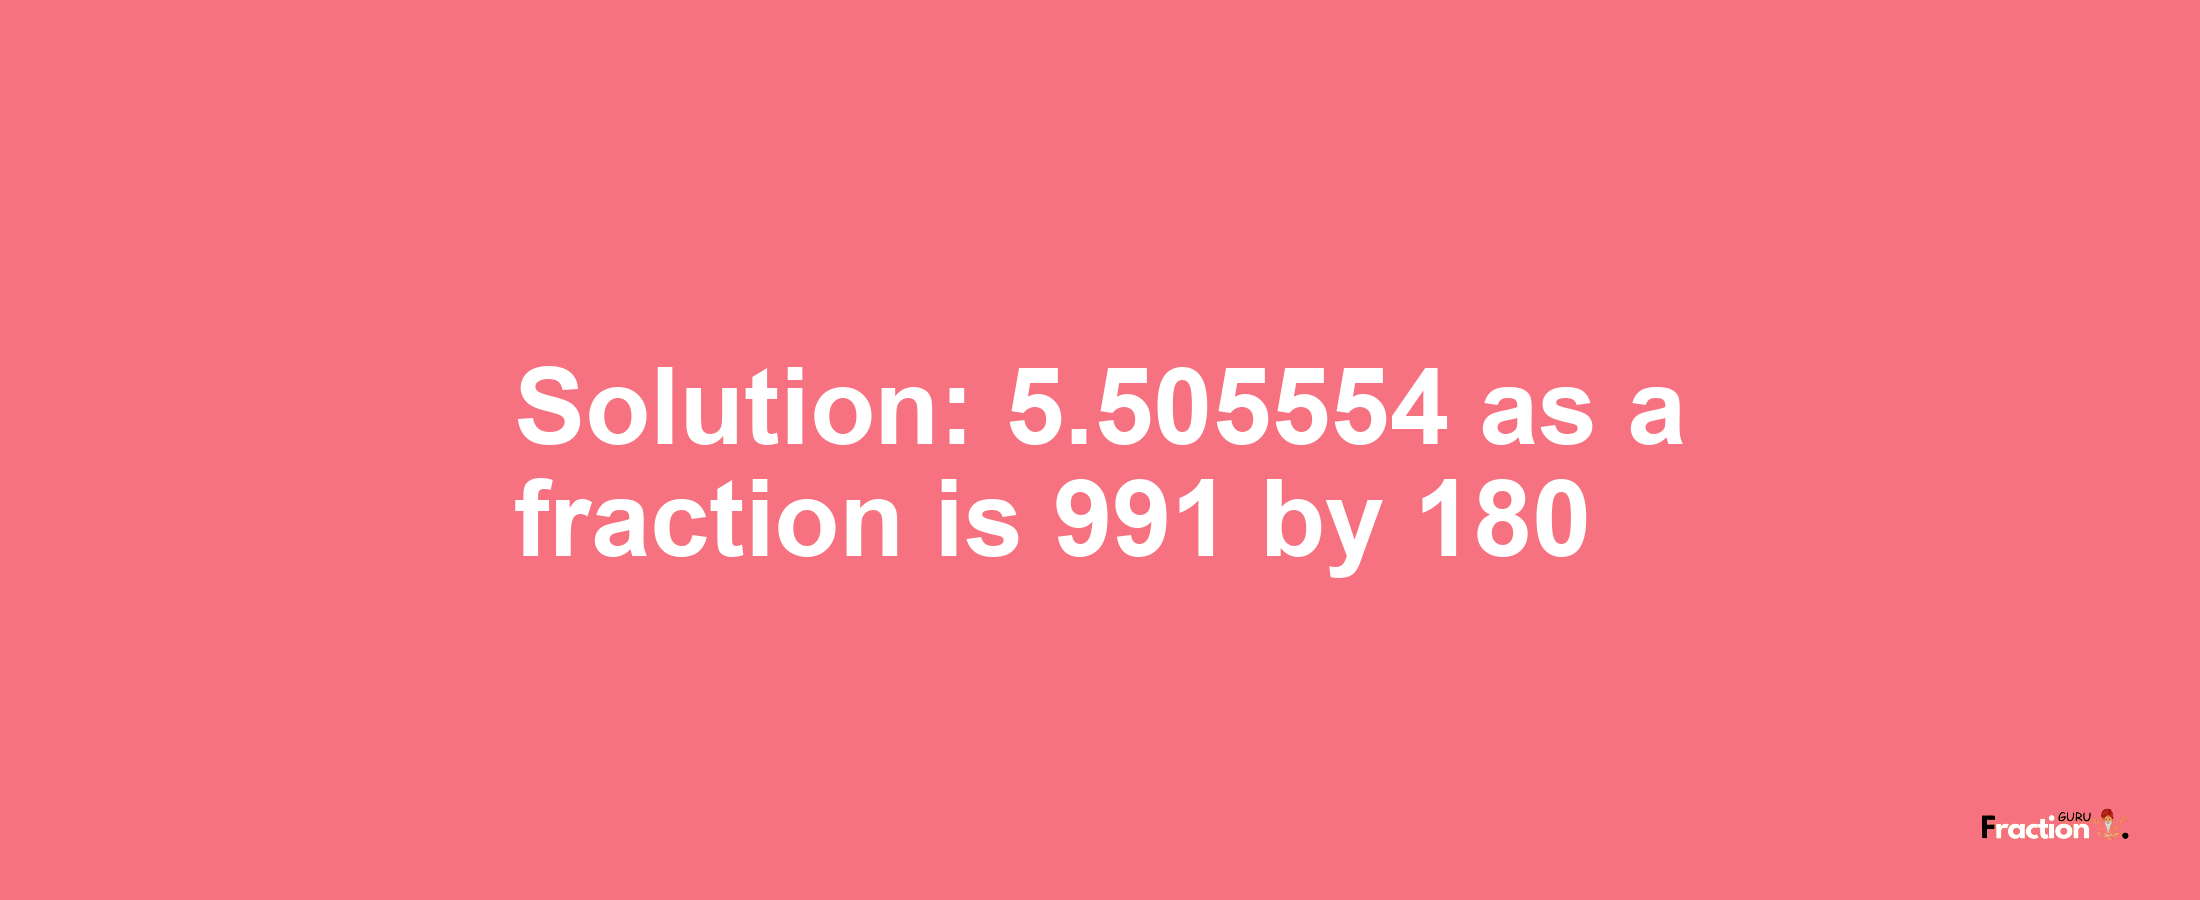 Solution:5.505554 as a fraction is 991/180